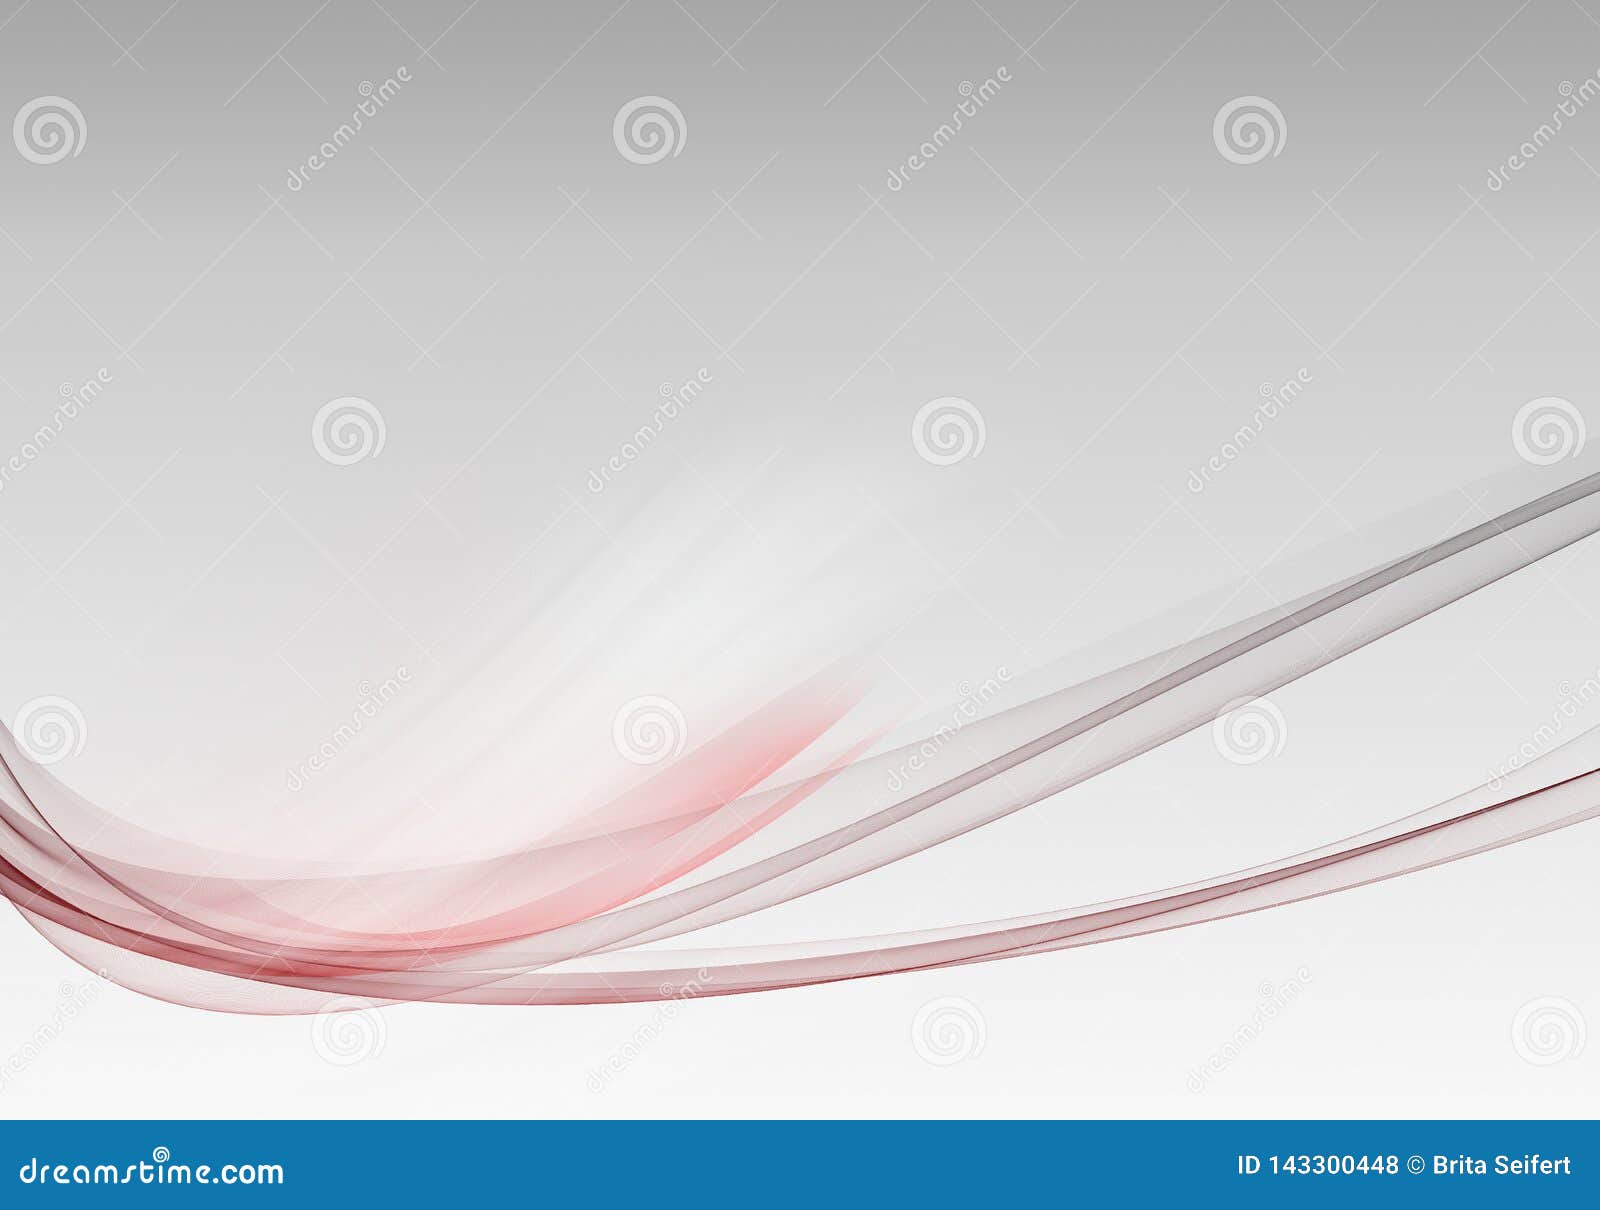 Abstract Grey and Red Background Waves. Bright Abstract Background